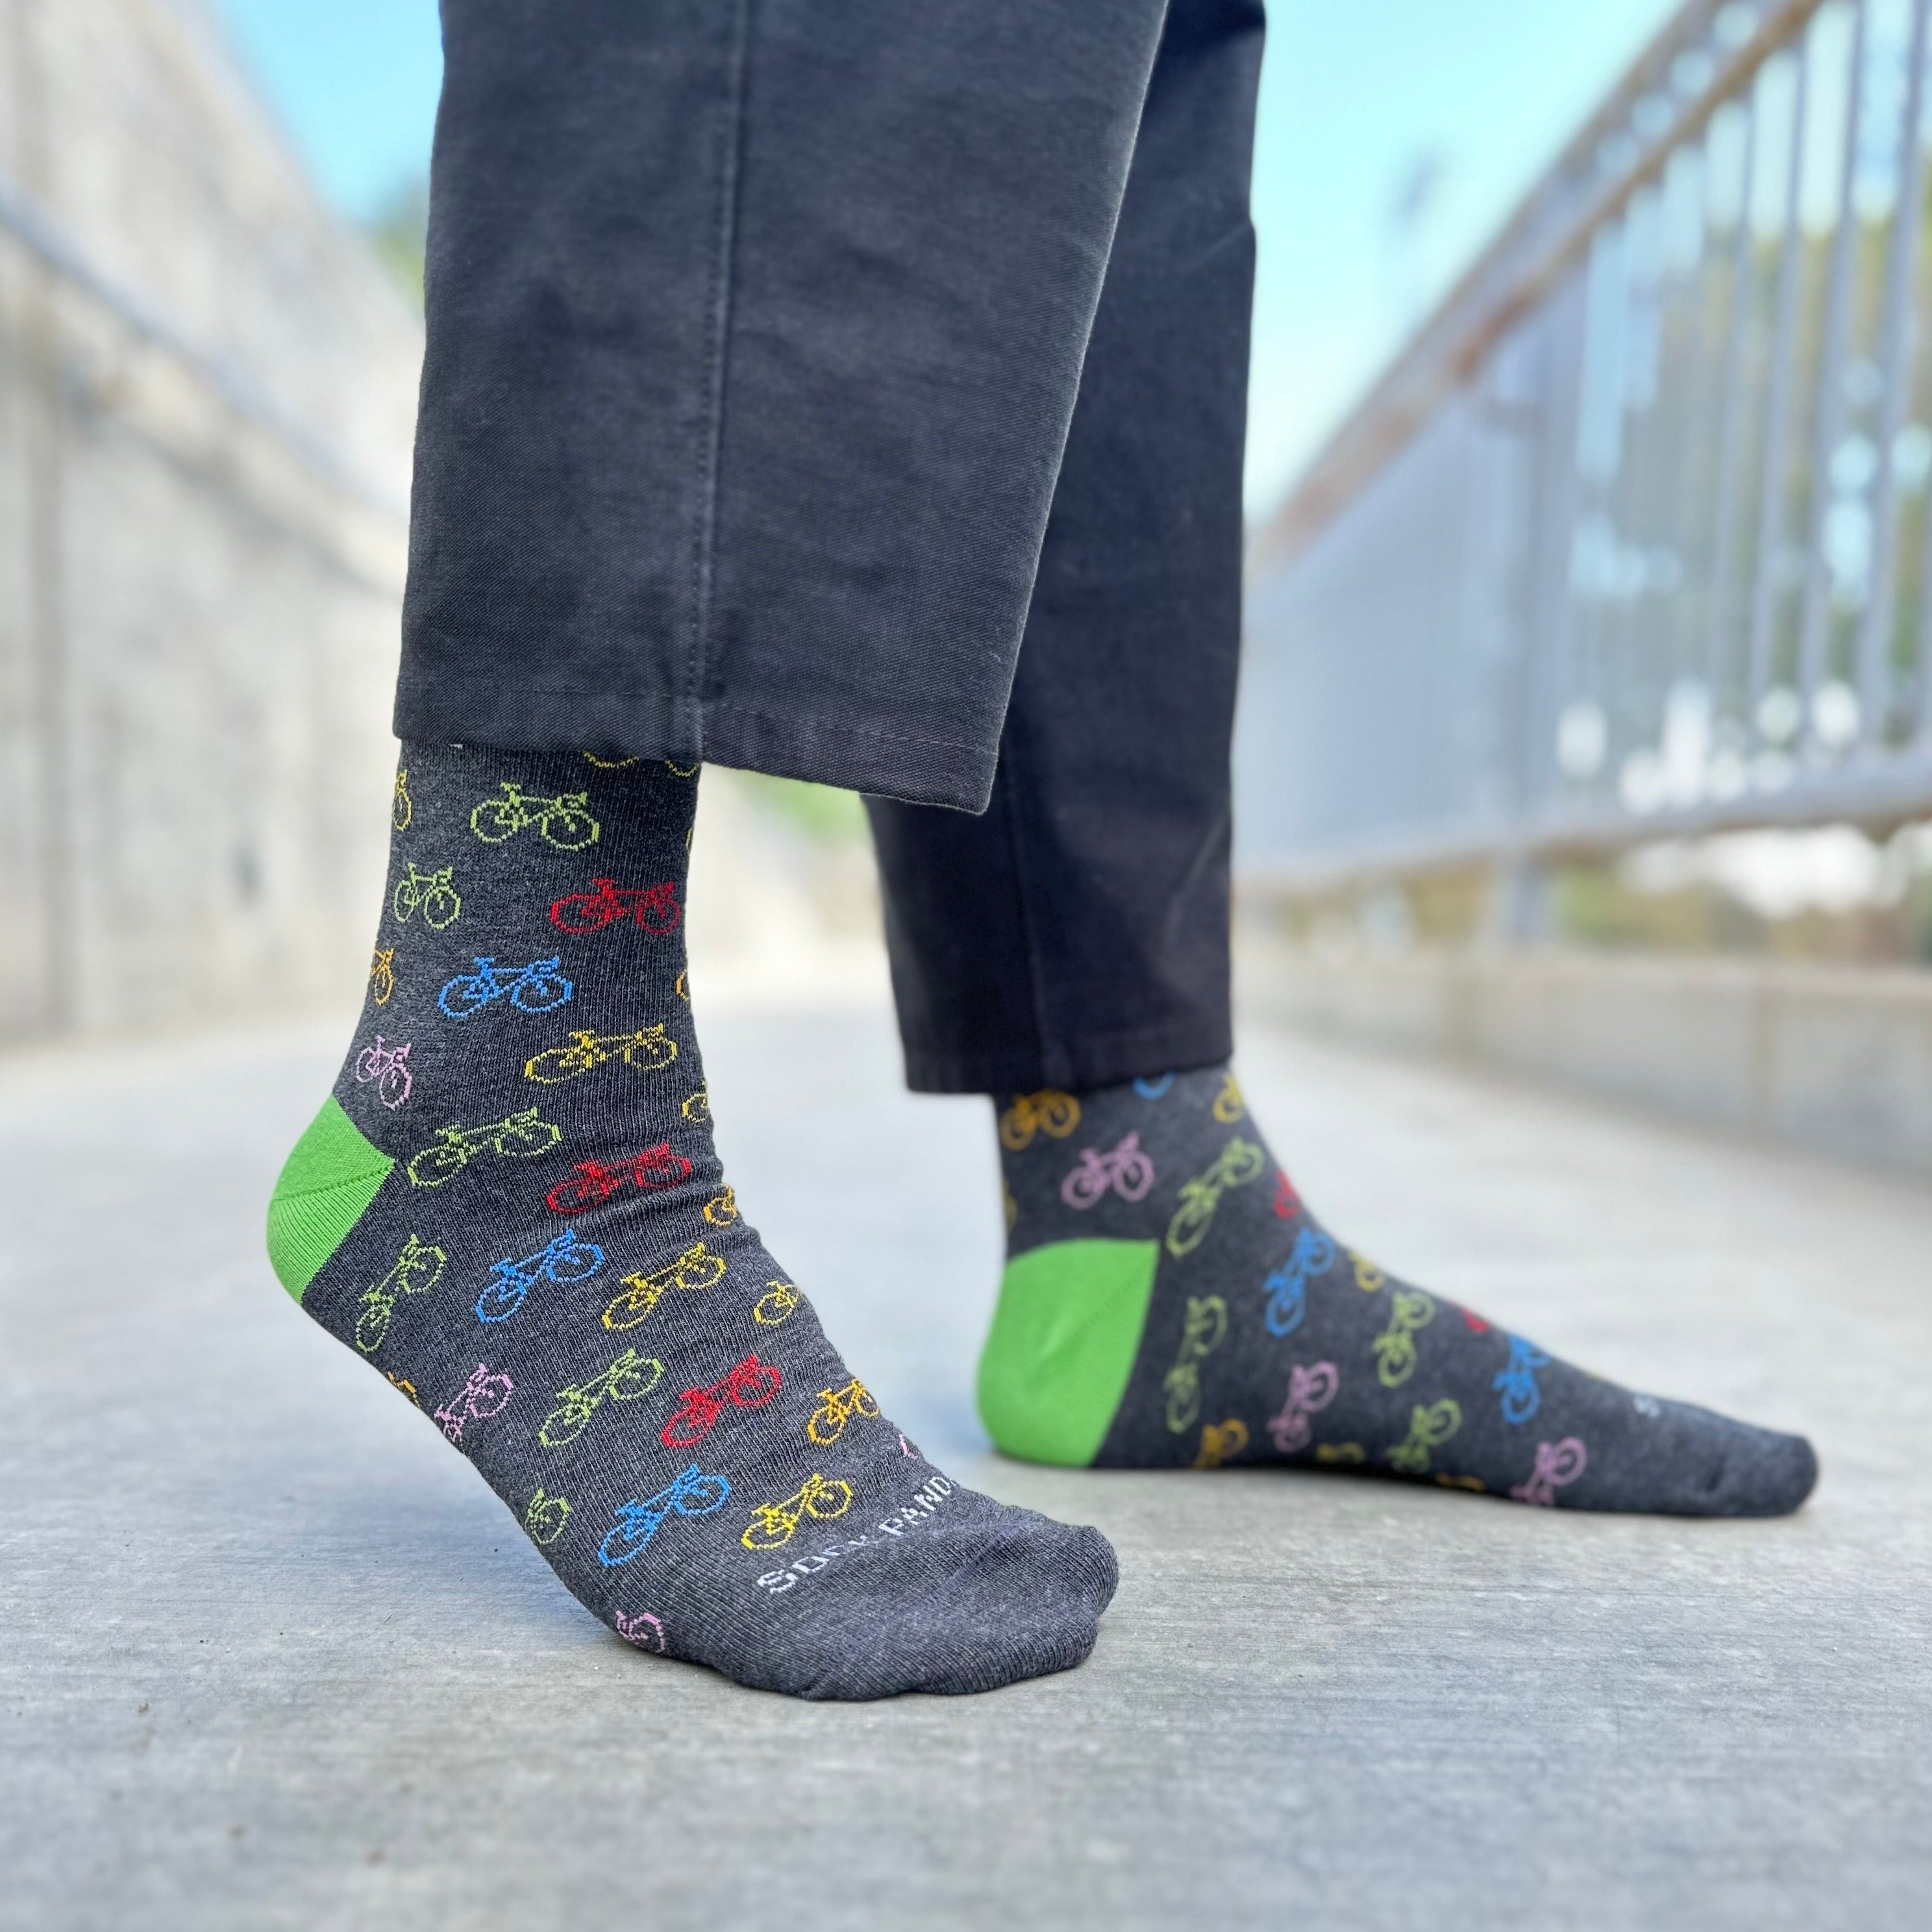 Colorful Bicycle Pattern Socks from the Sock Panda (Adult Large